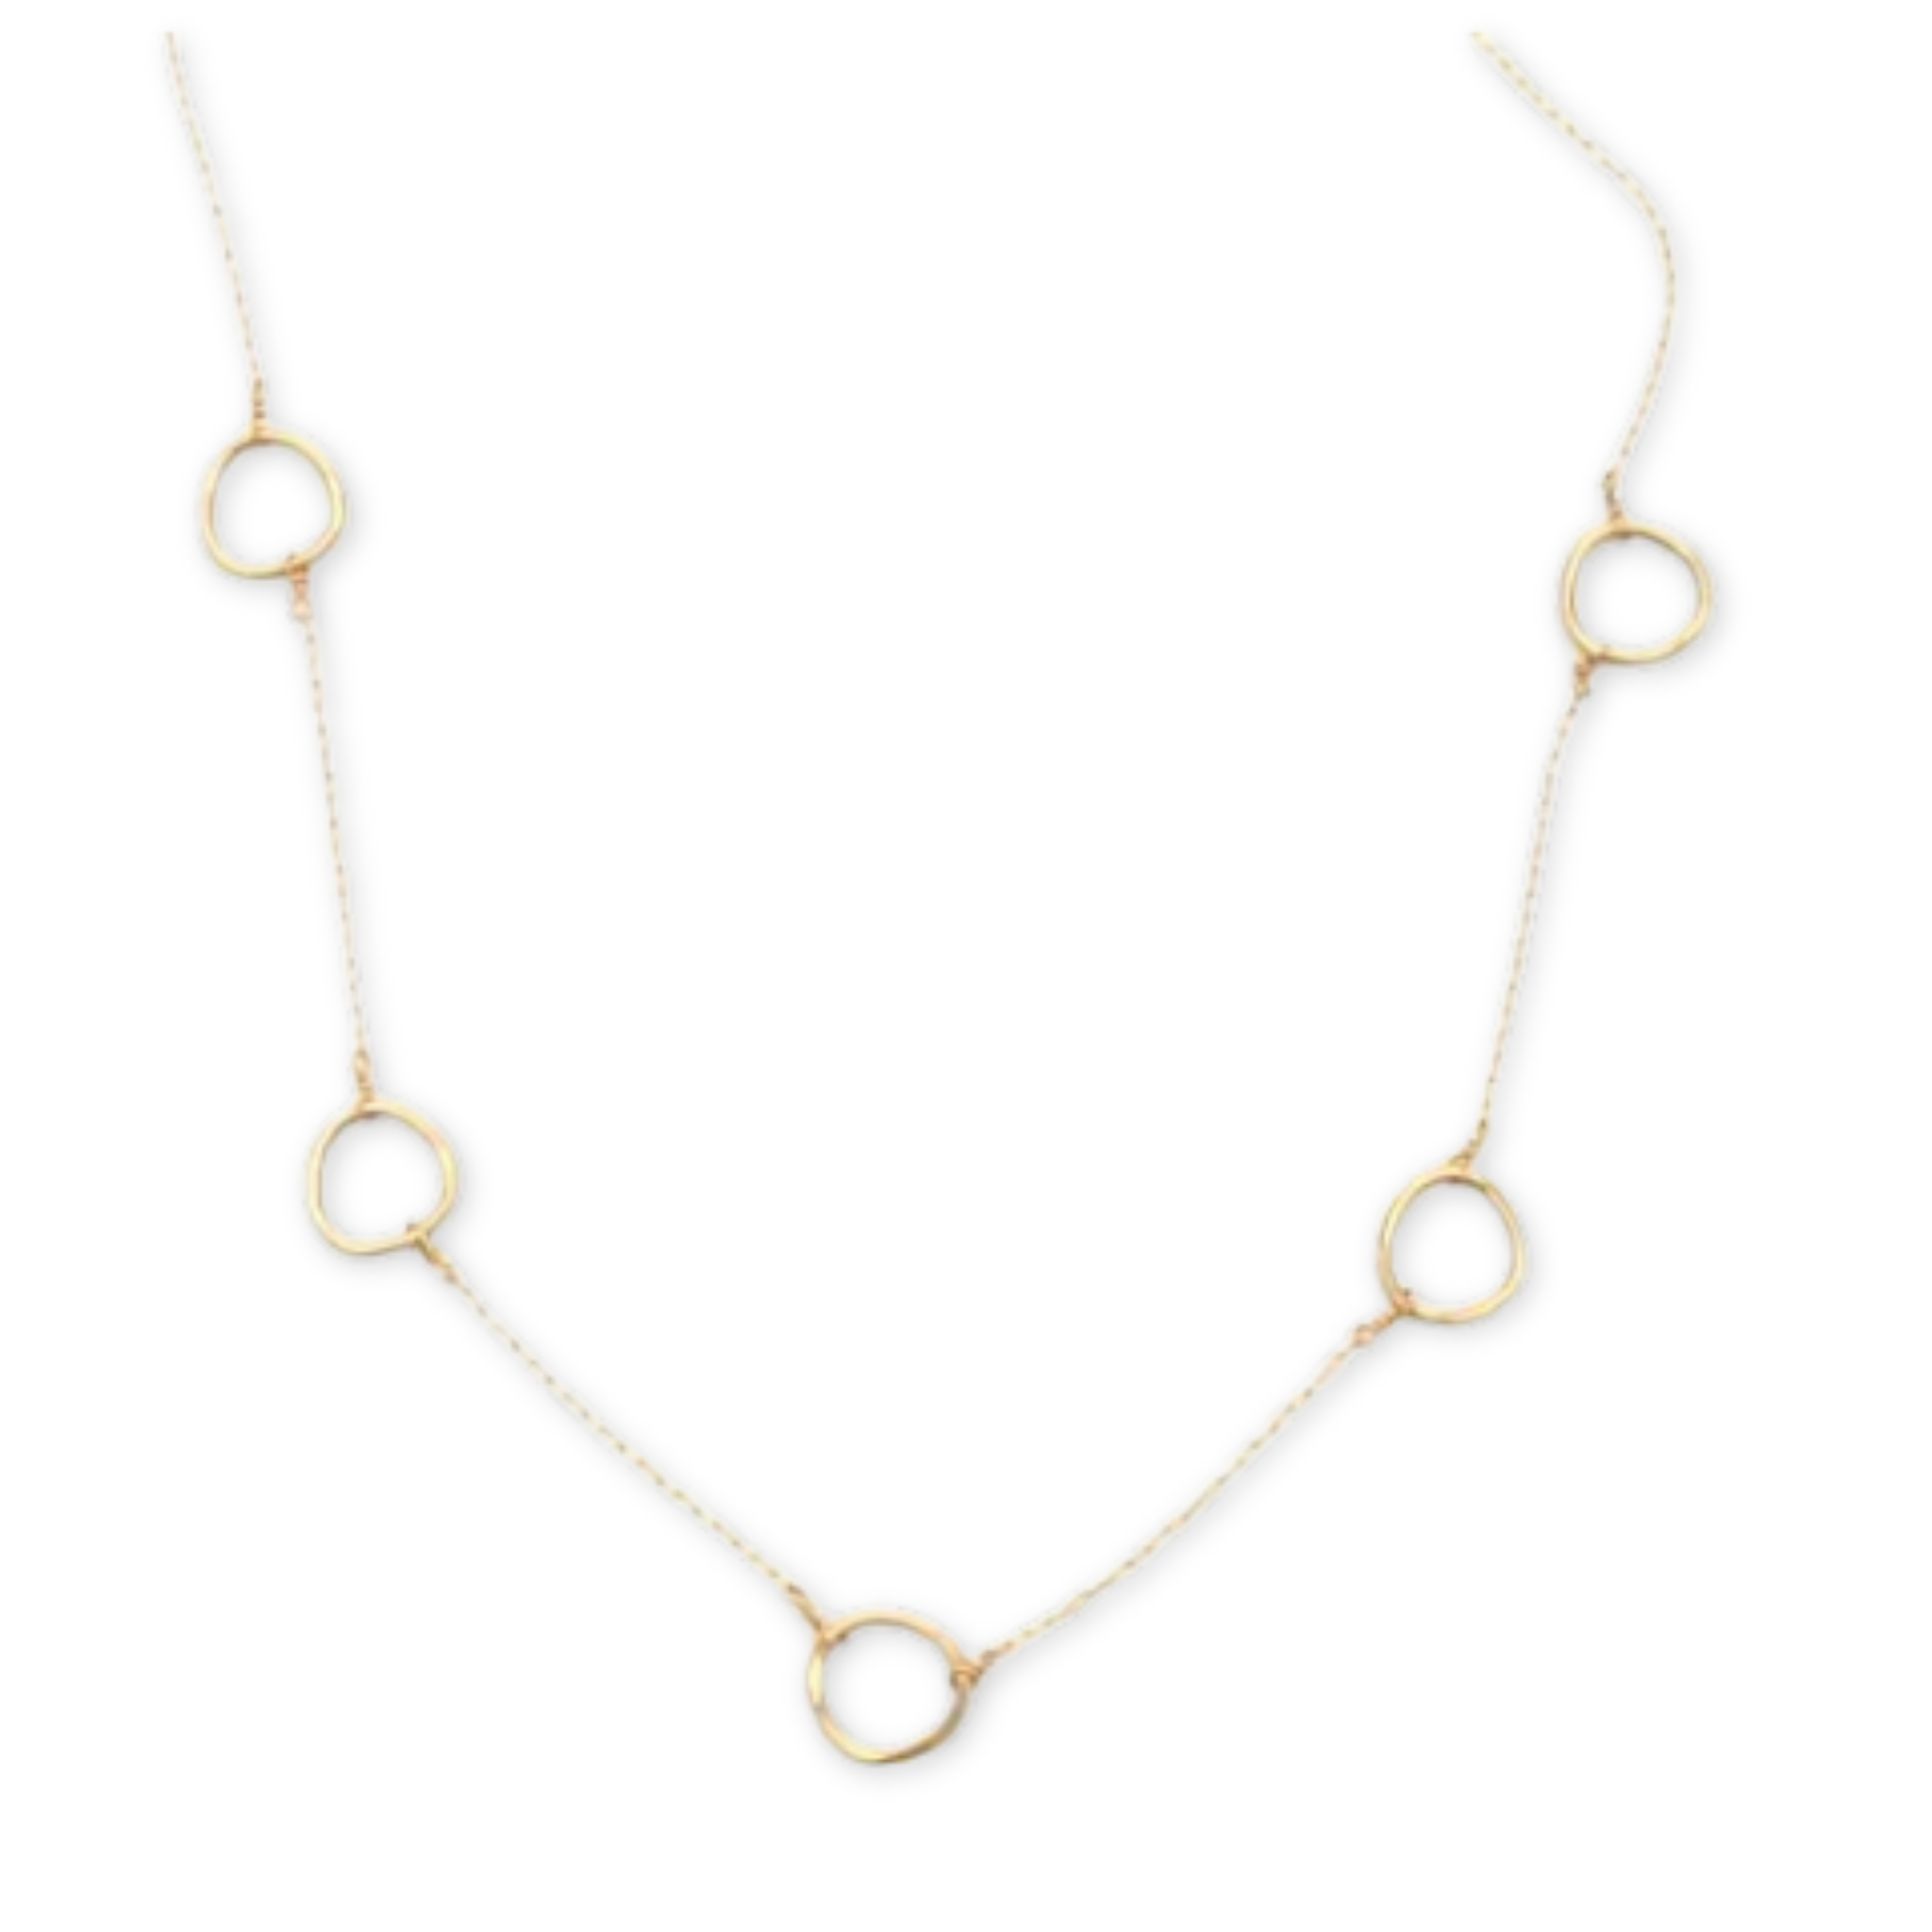 necklace with five small circles